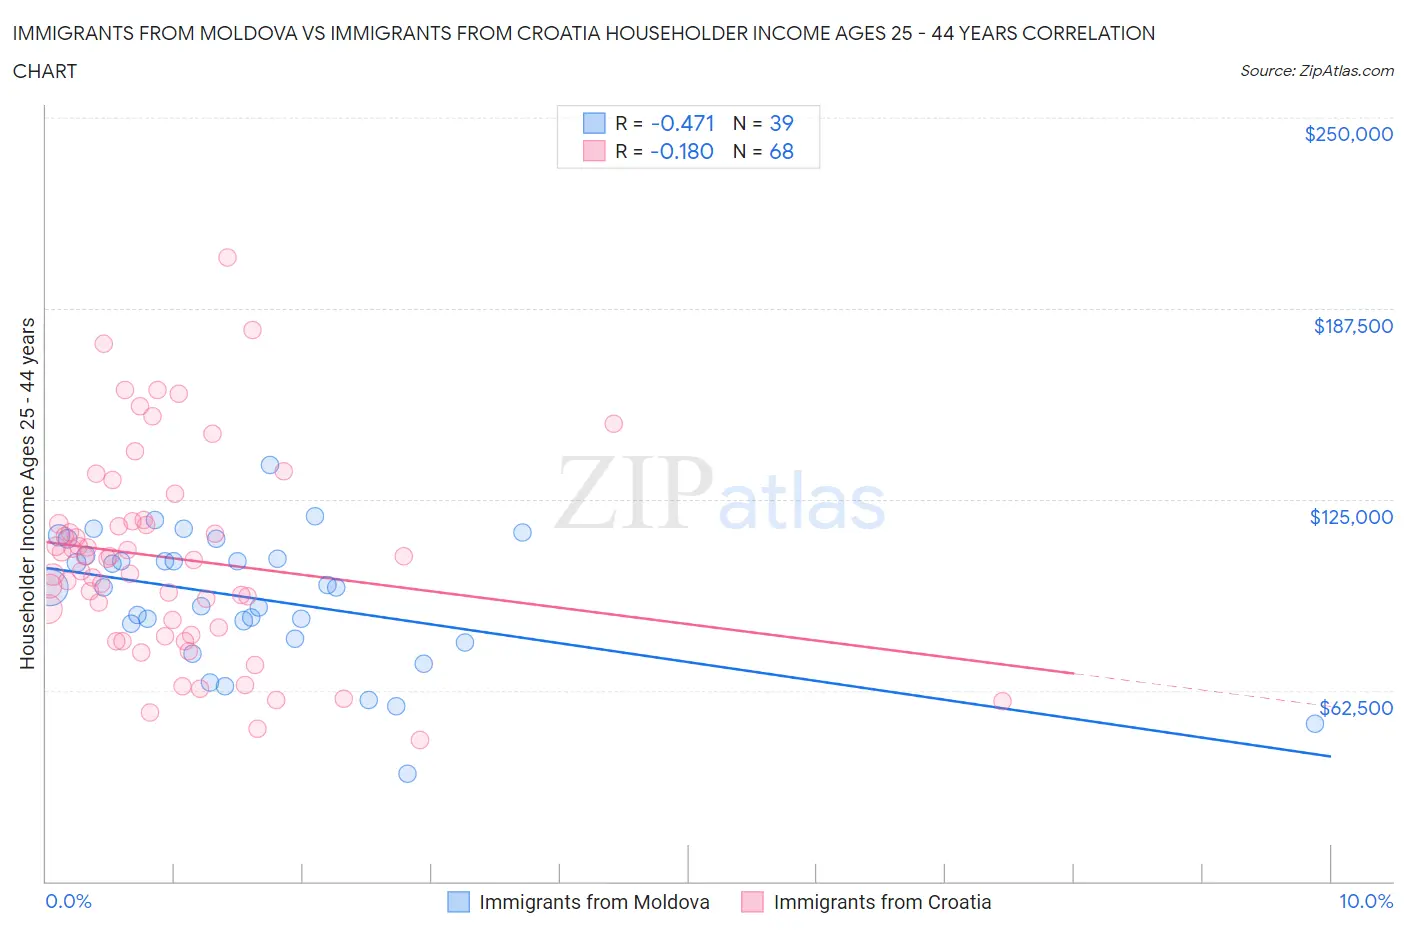 Immigrants from Moldova vs Immigrants from Croatia Householder Income Ages 25 - 44 years